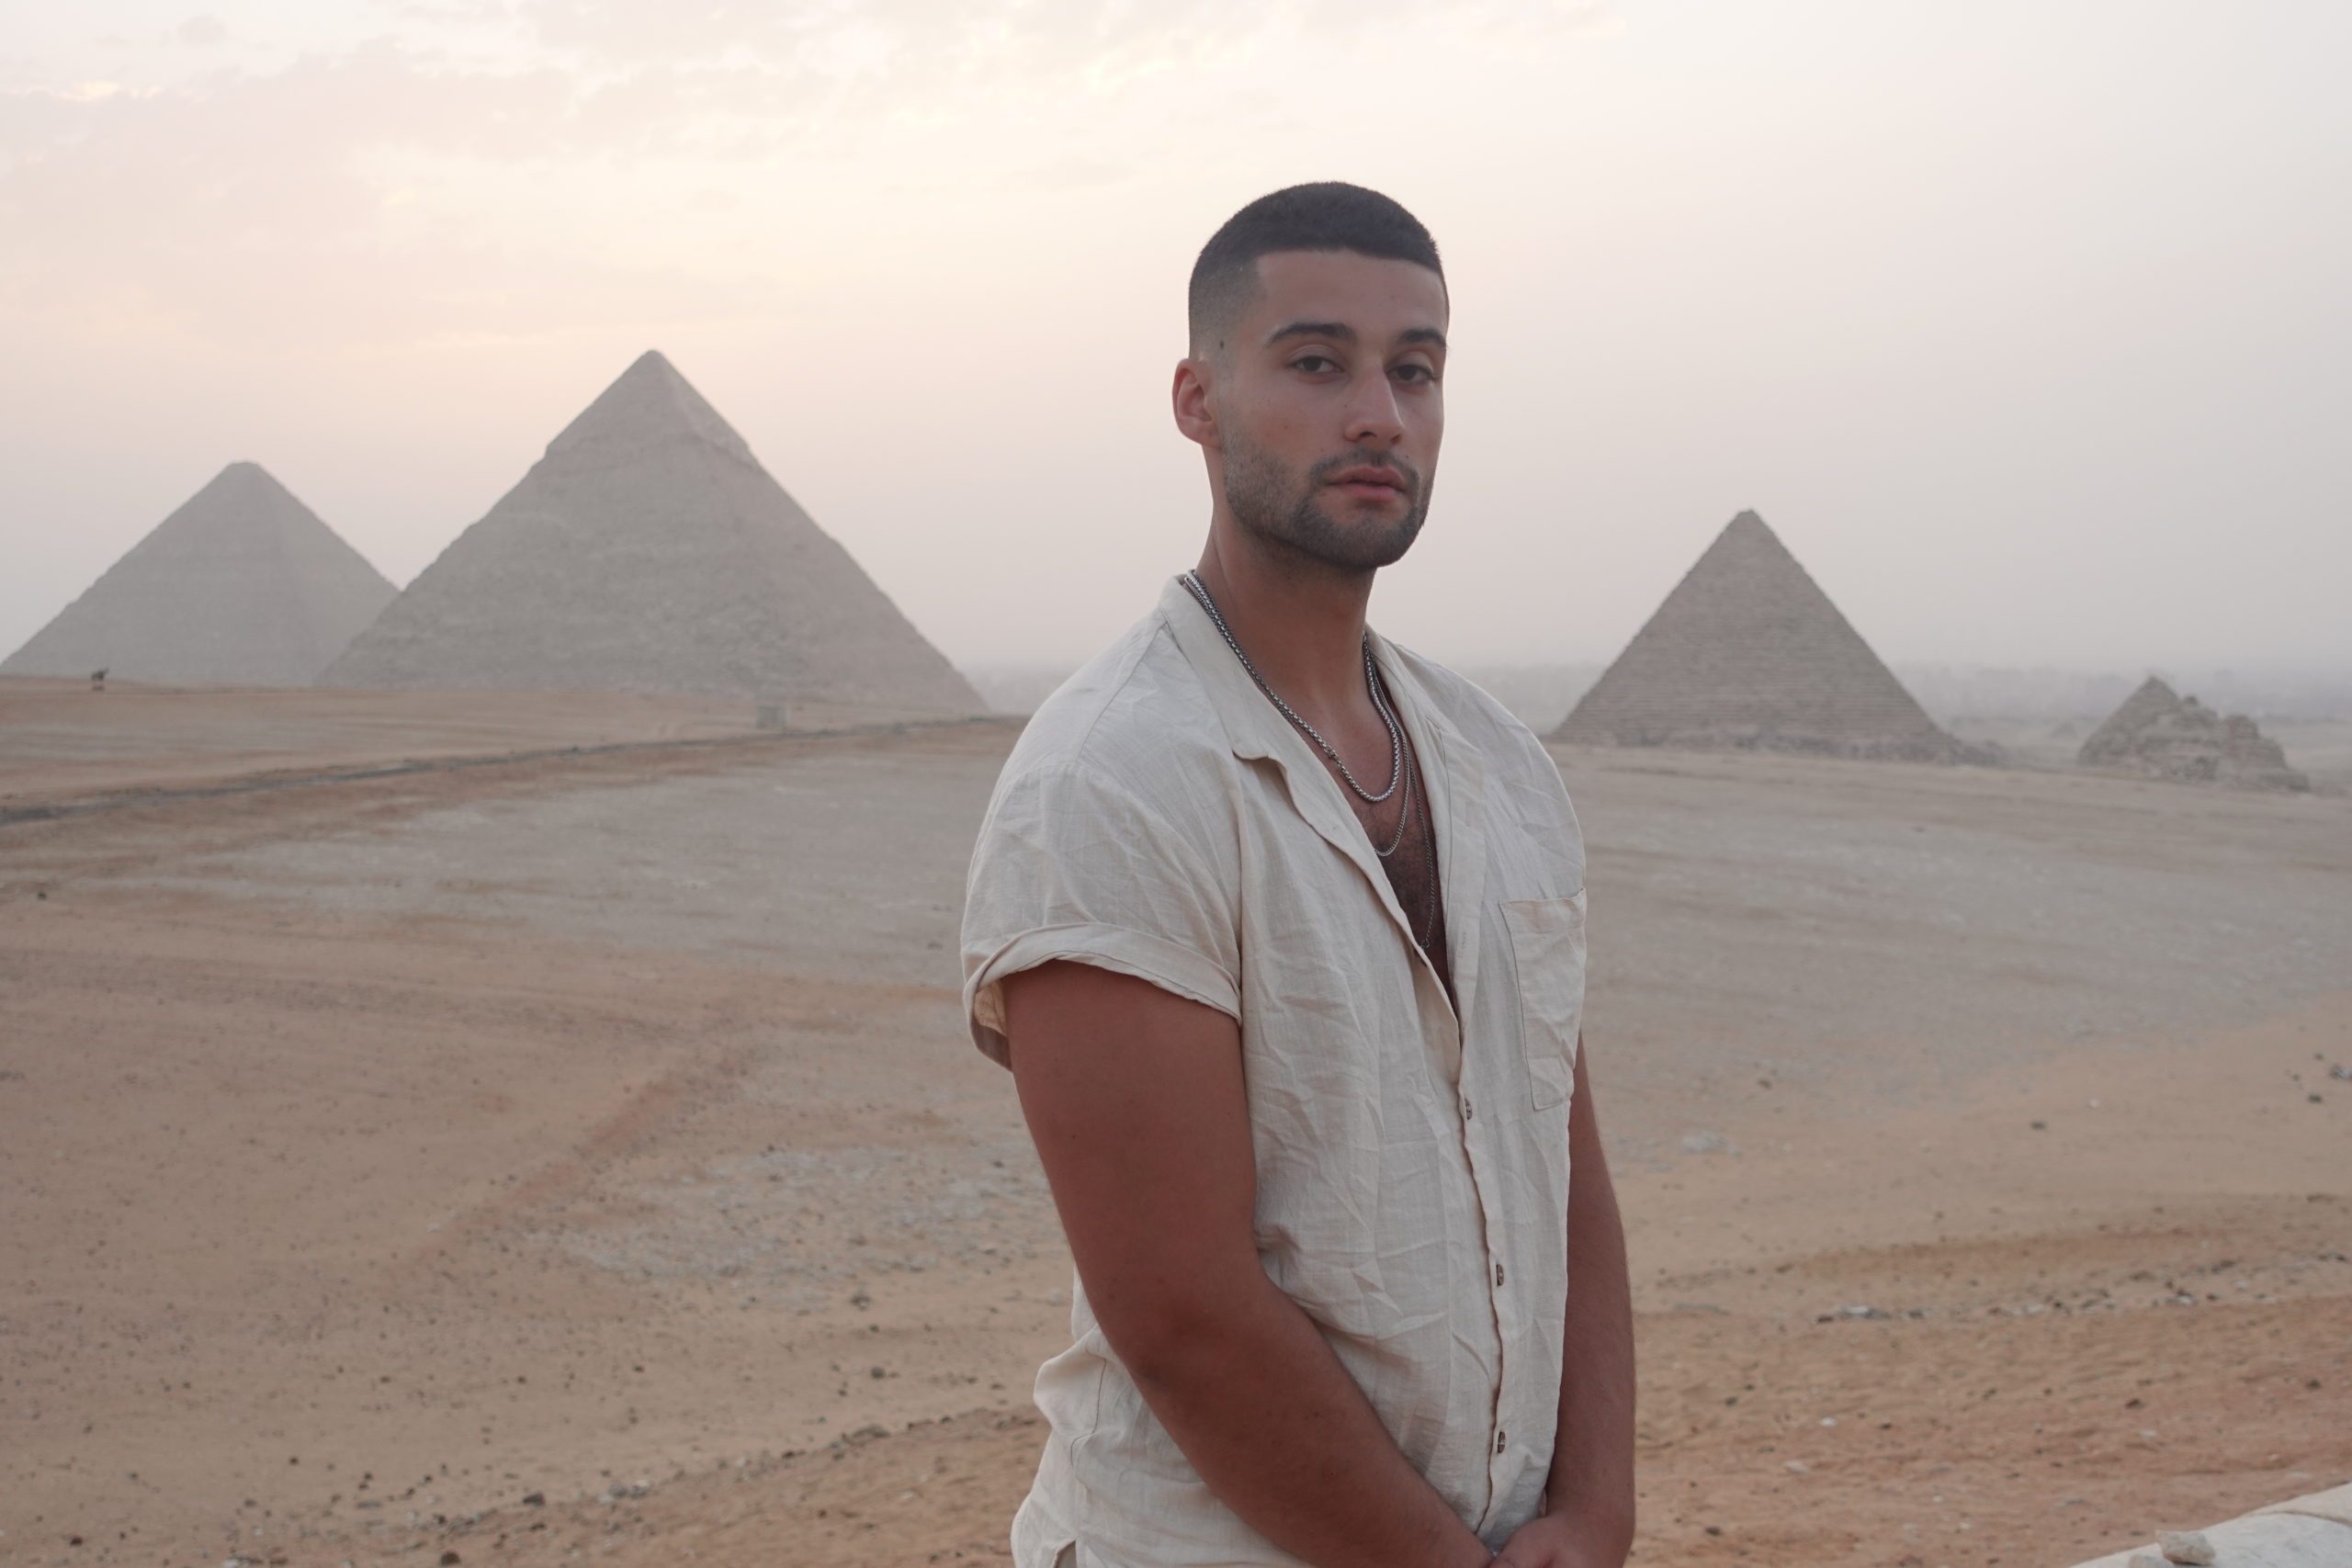 Alexander in front of the pyramids